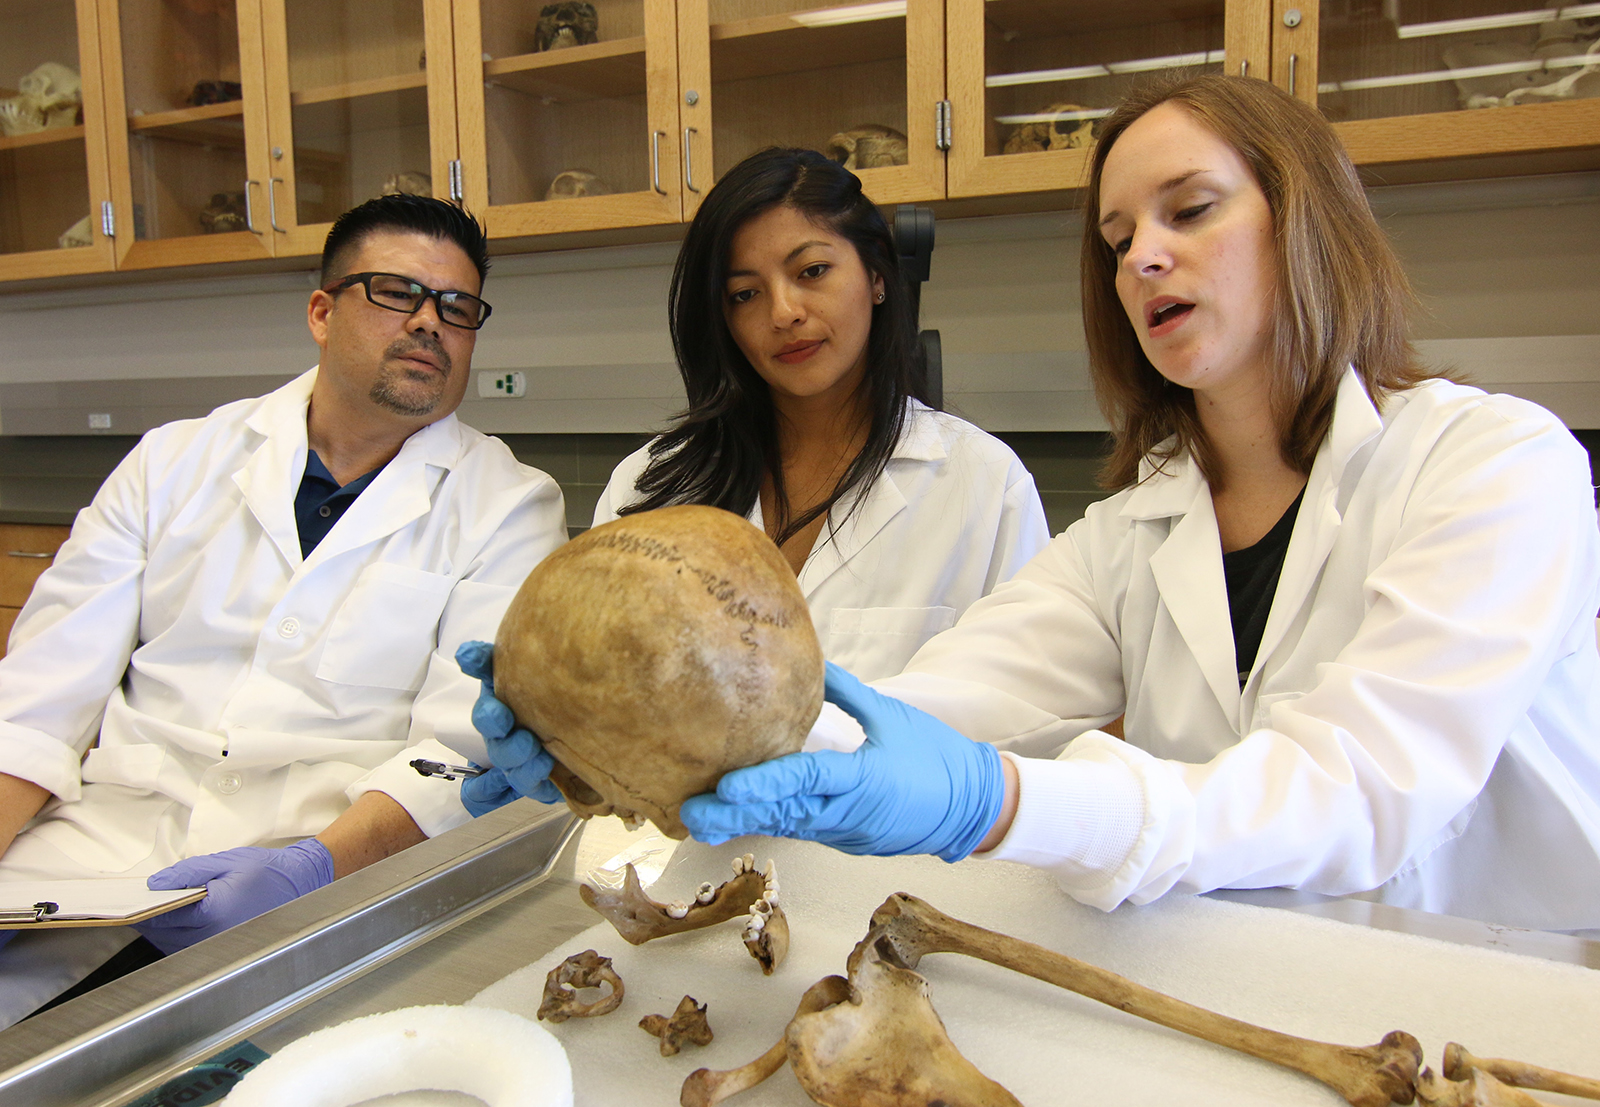 A professor and two students inspecting a human skull.